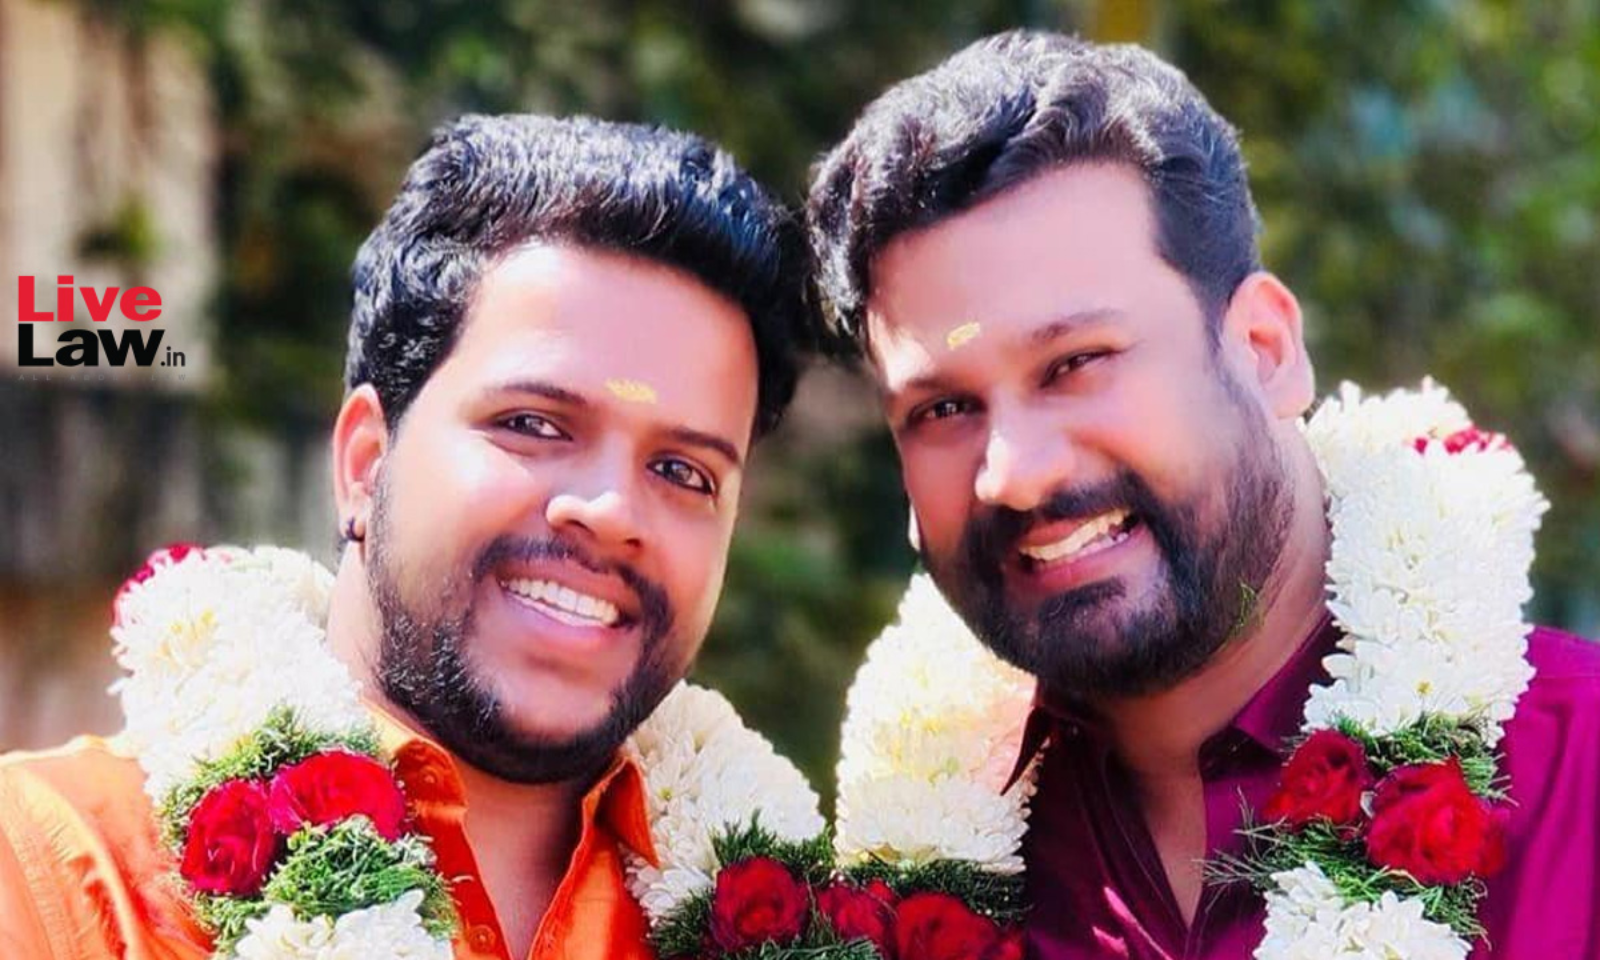 Legalising Same-Sex Marriages Interview Of Keralas First Married Gay Couple photo image